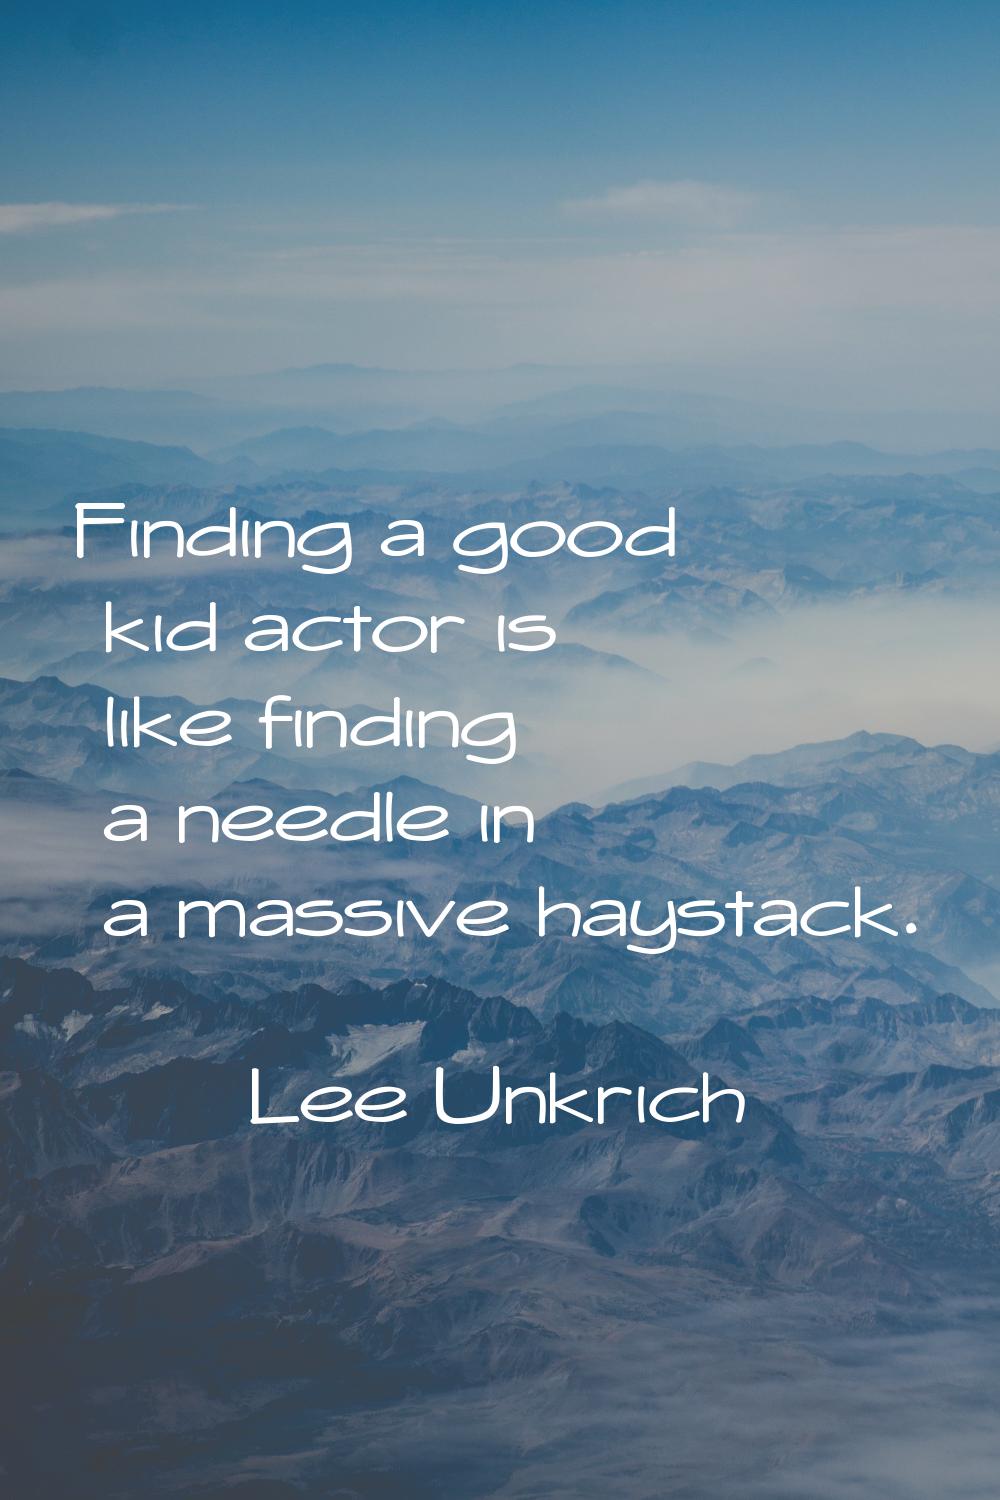 Finding a good kid actor is like finding a needle in a massive haystack.